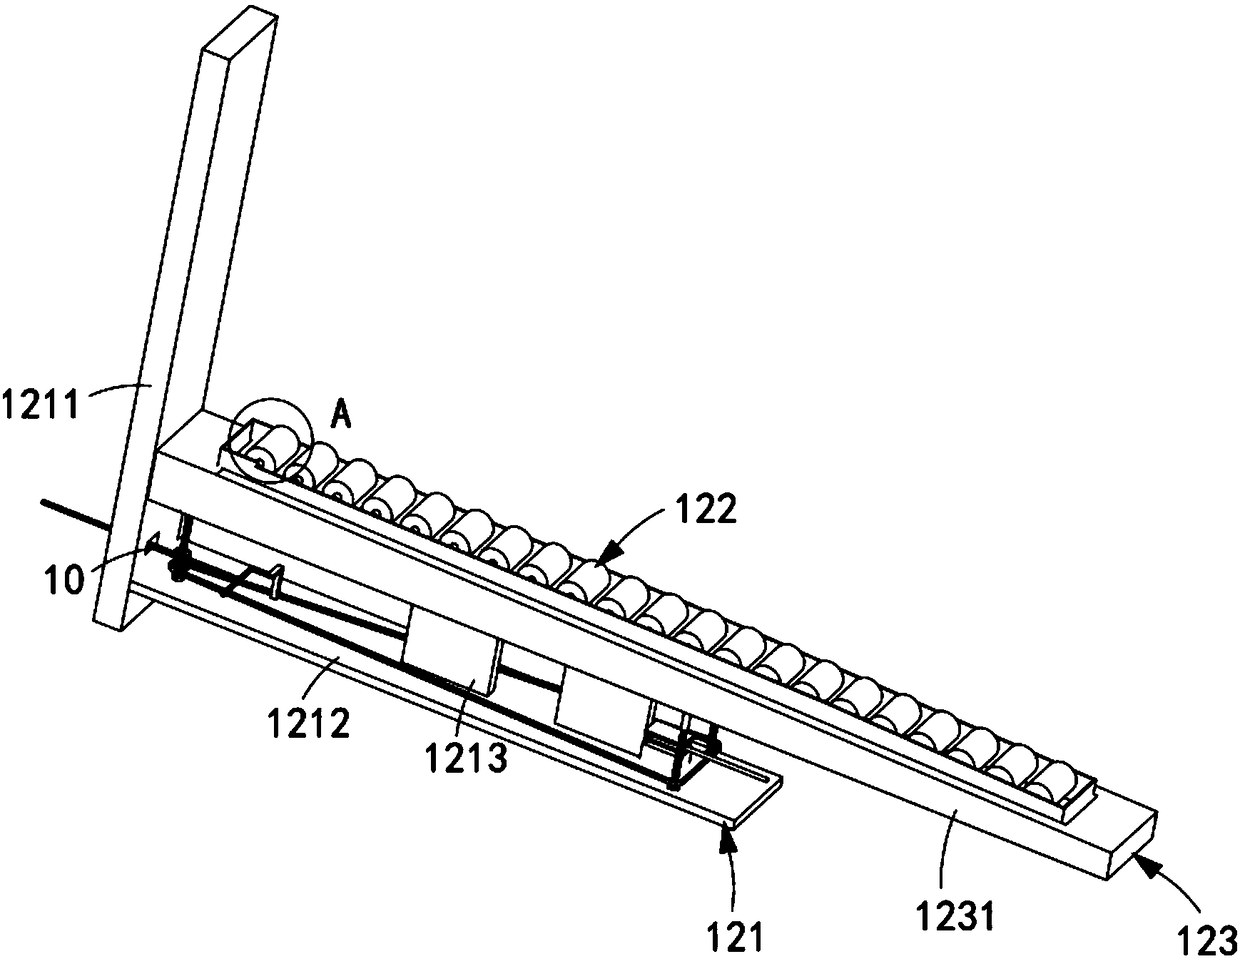 Smooth feeding door frame assembly for forklift and forklift applying smooth feeding door frame assembly